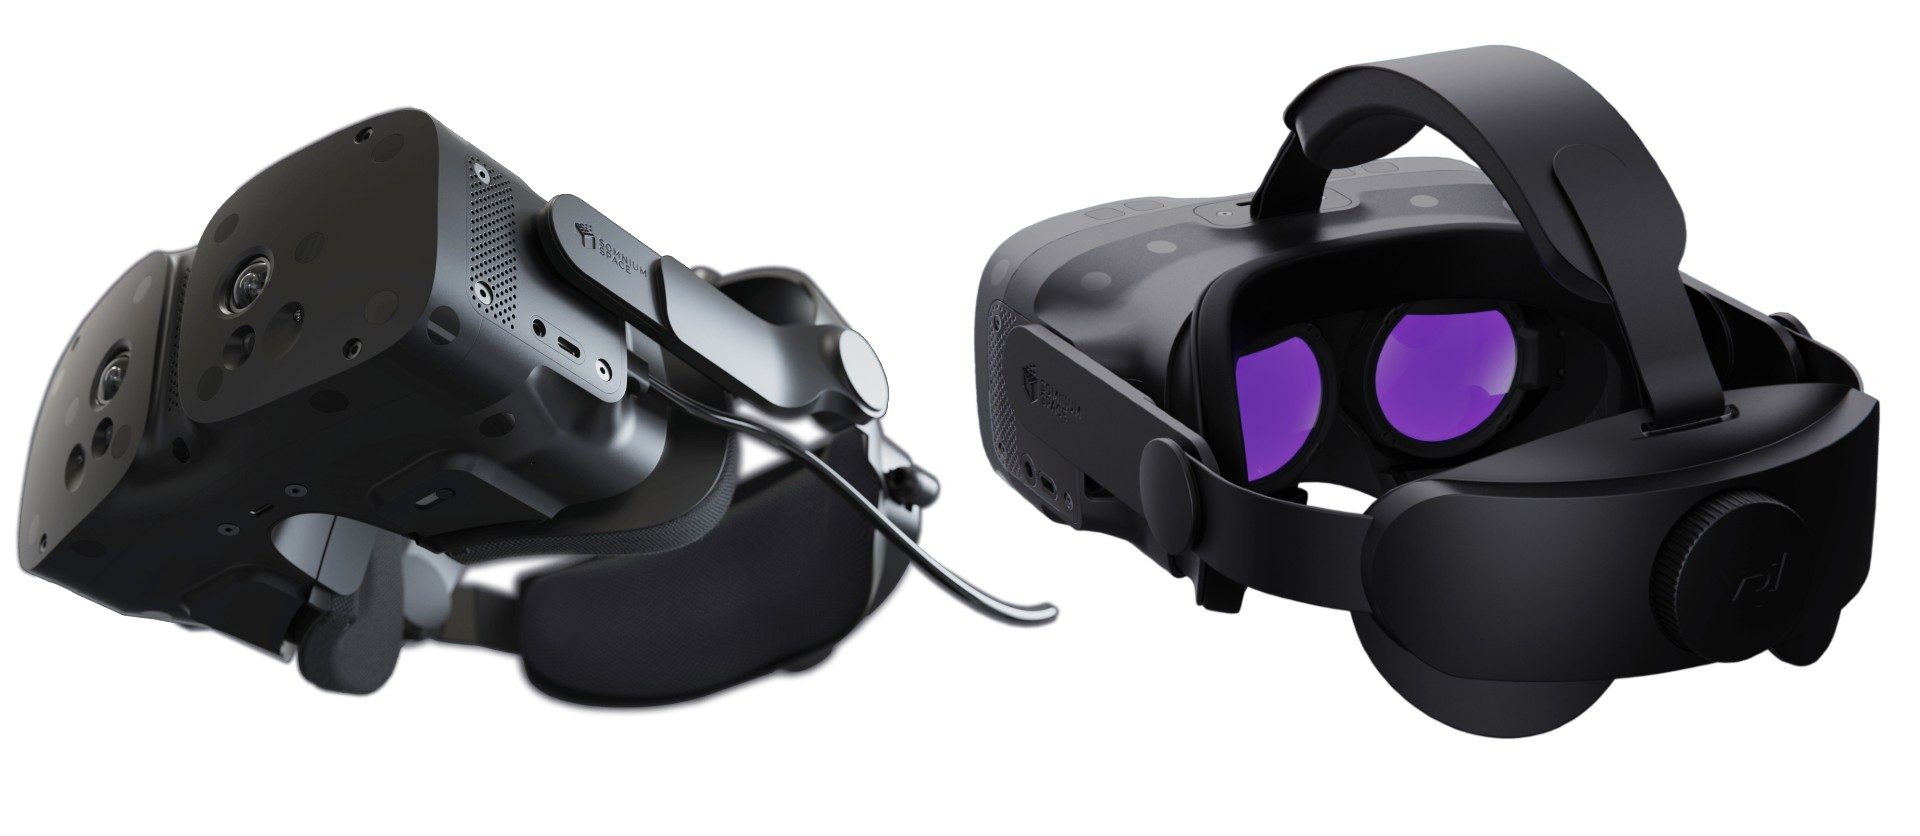 Somnium VR1 PC VR Headset Slated to Go on Sale June 20th with Broader Launch in July